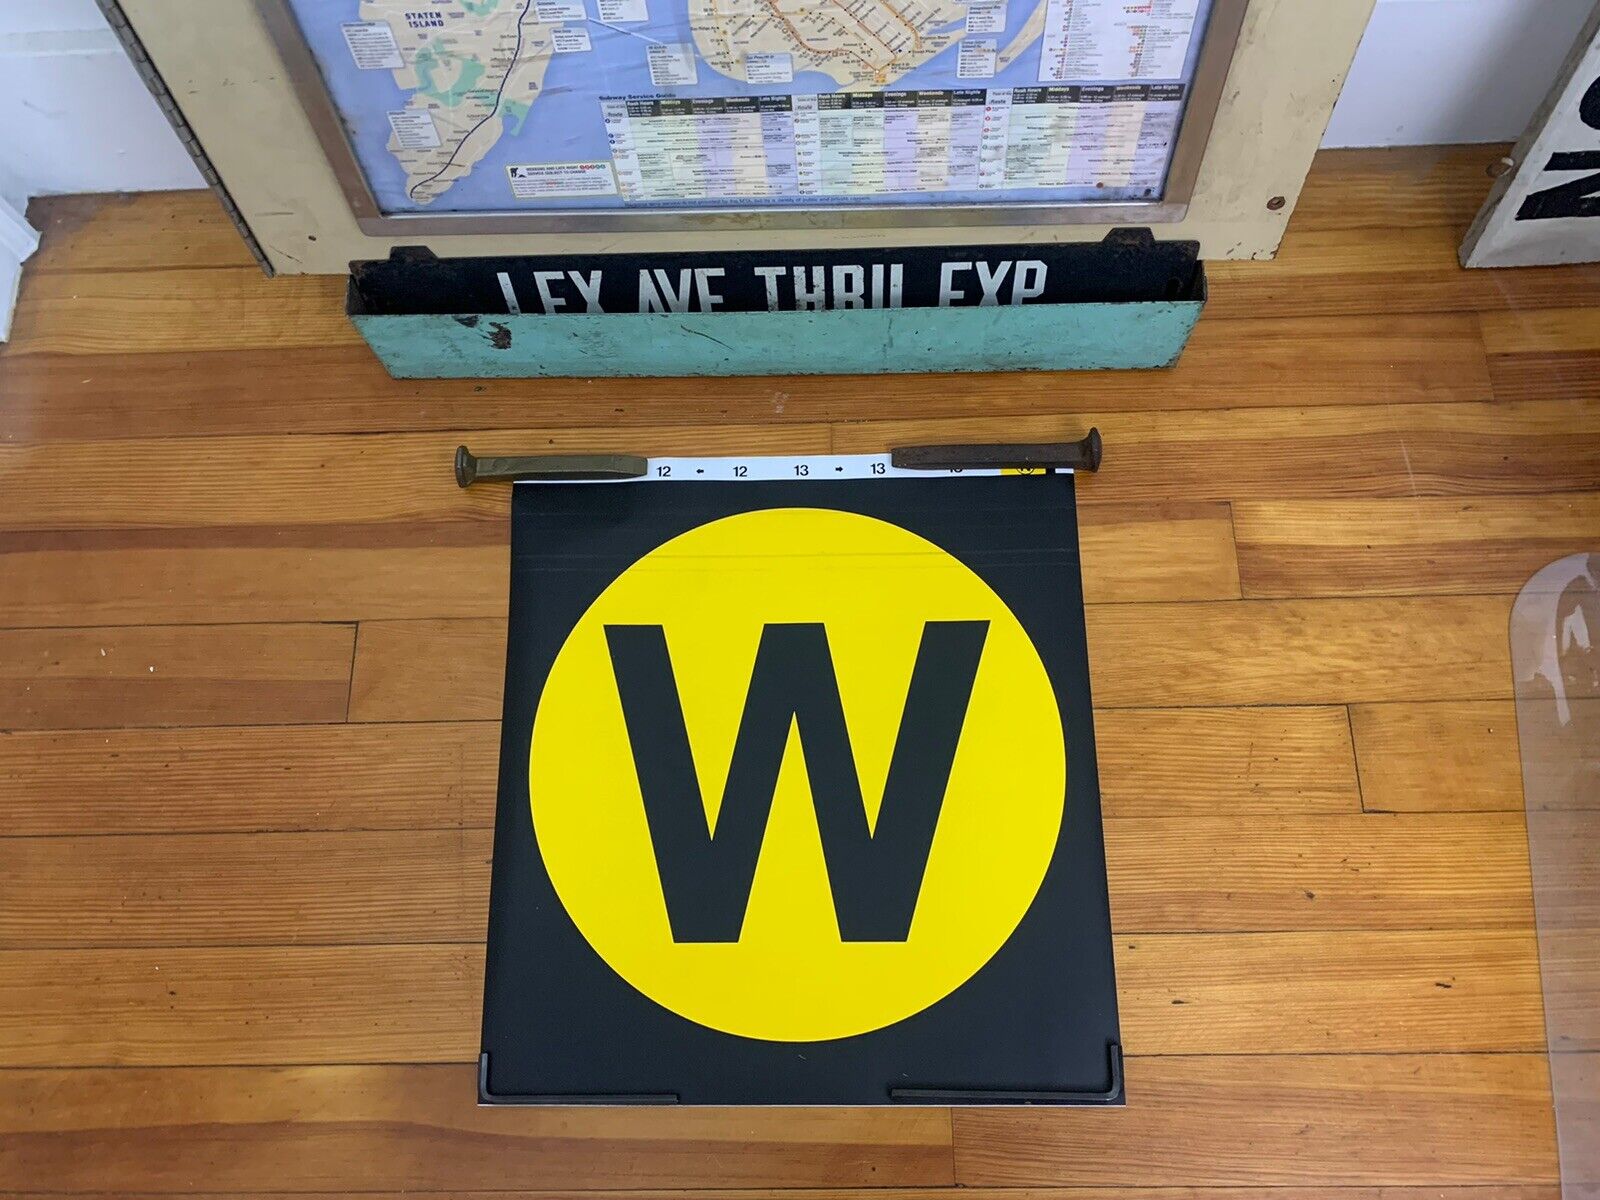 19X18 NY NYC SUBWAY ROLL SIGN COLLECTIBLE ROUTE INITIAL W OR M LINE TRAIN ART